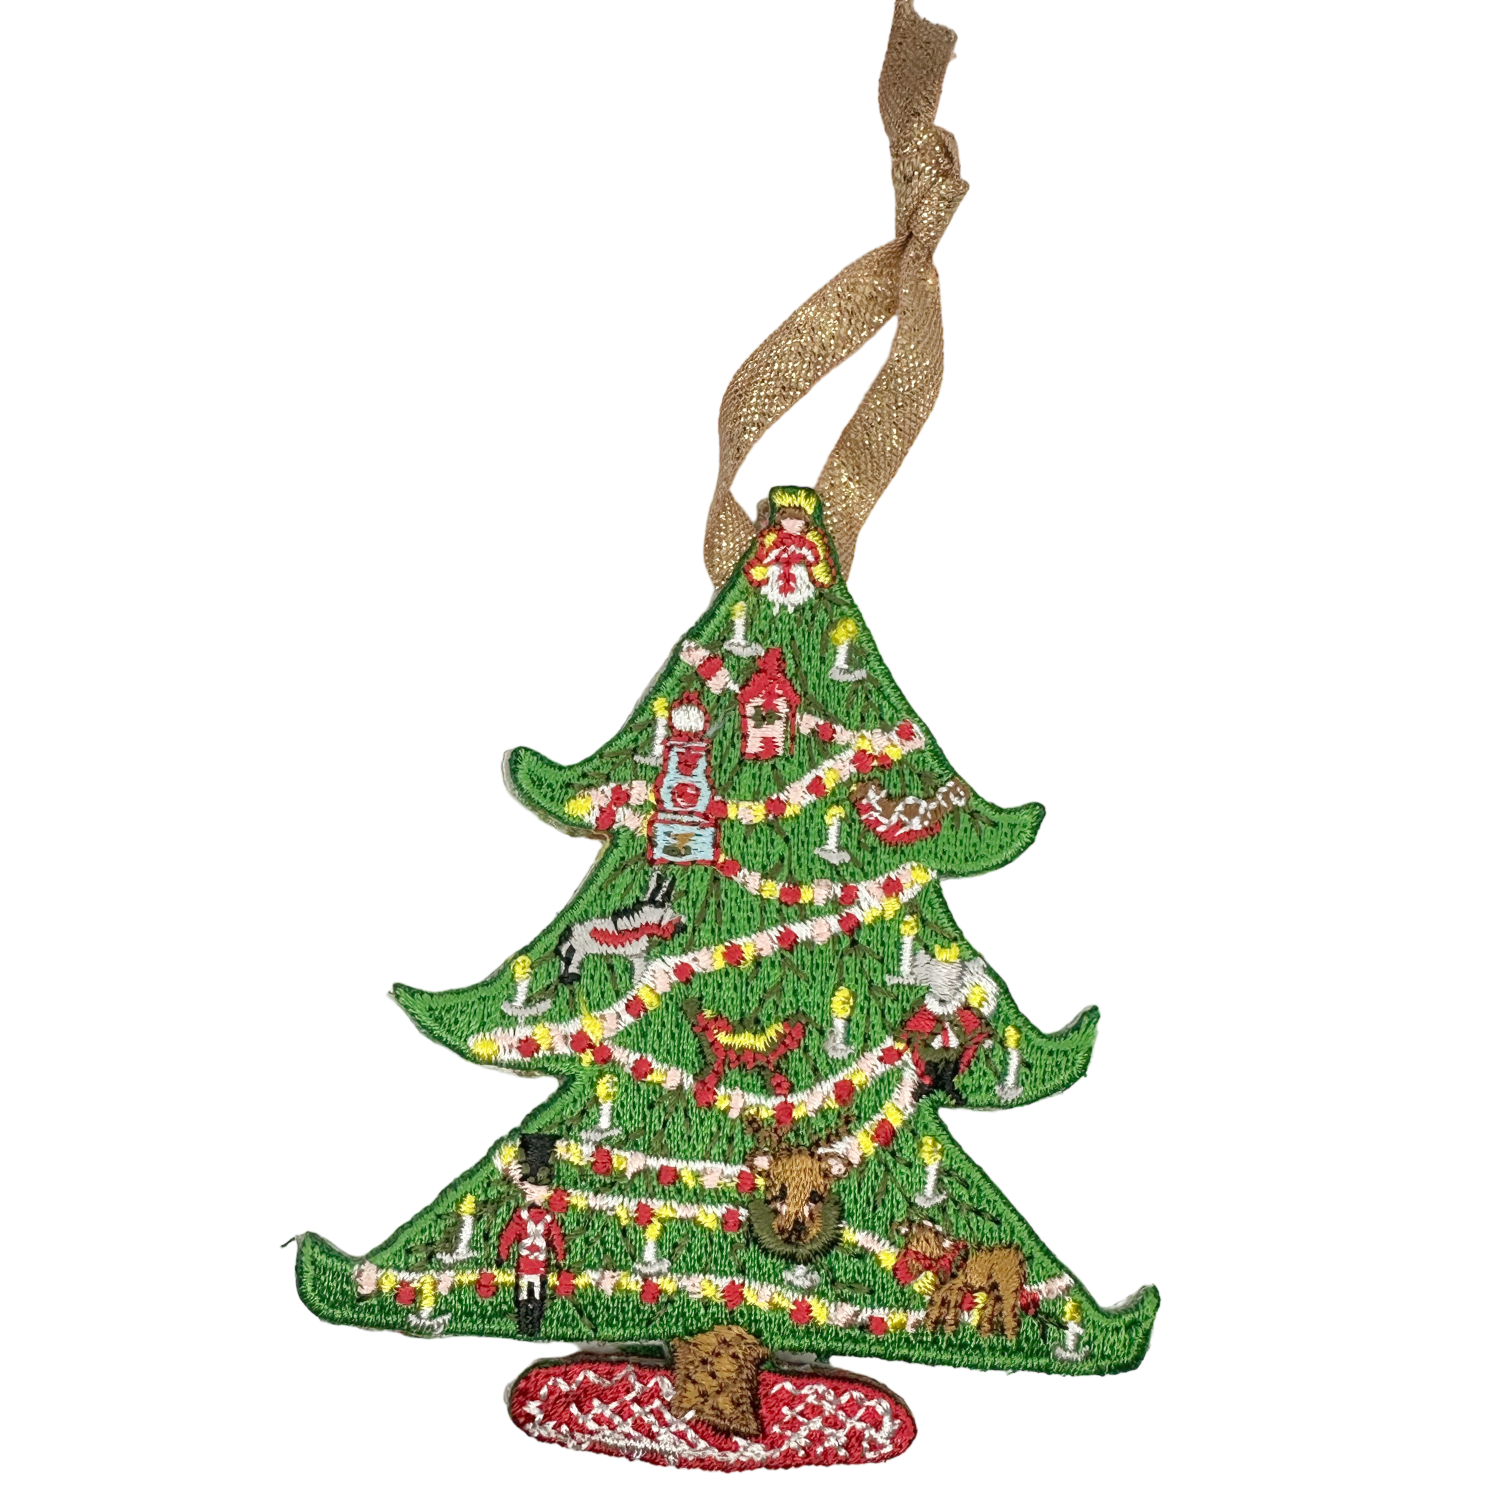 Nutcracker Embroidered Ornament - Harlequin Doll - Premium  from Tricia Lowenfield Design 